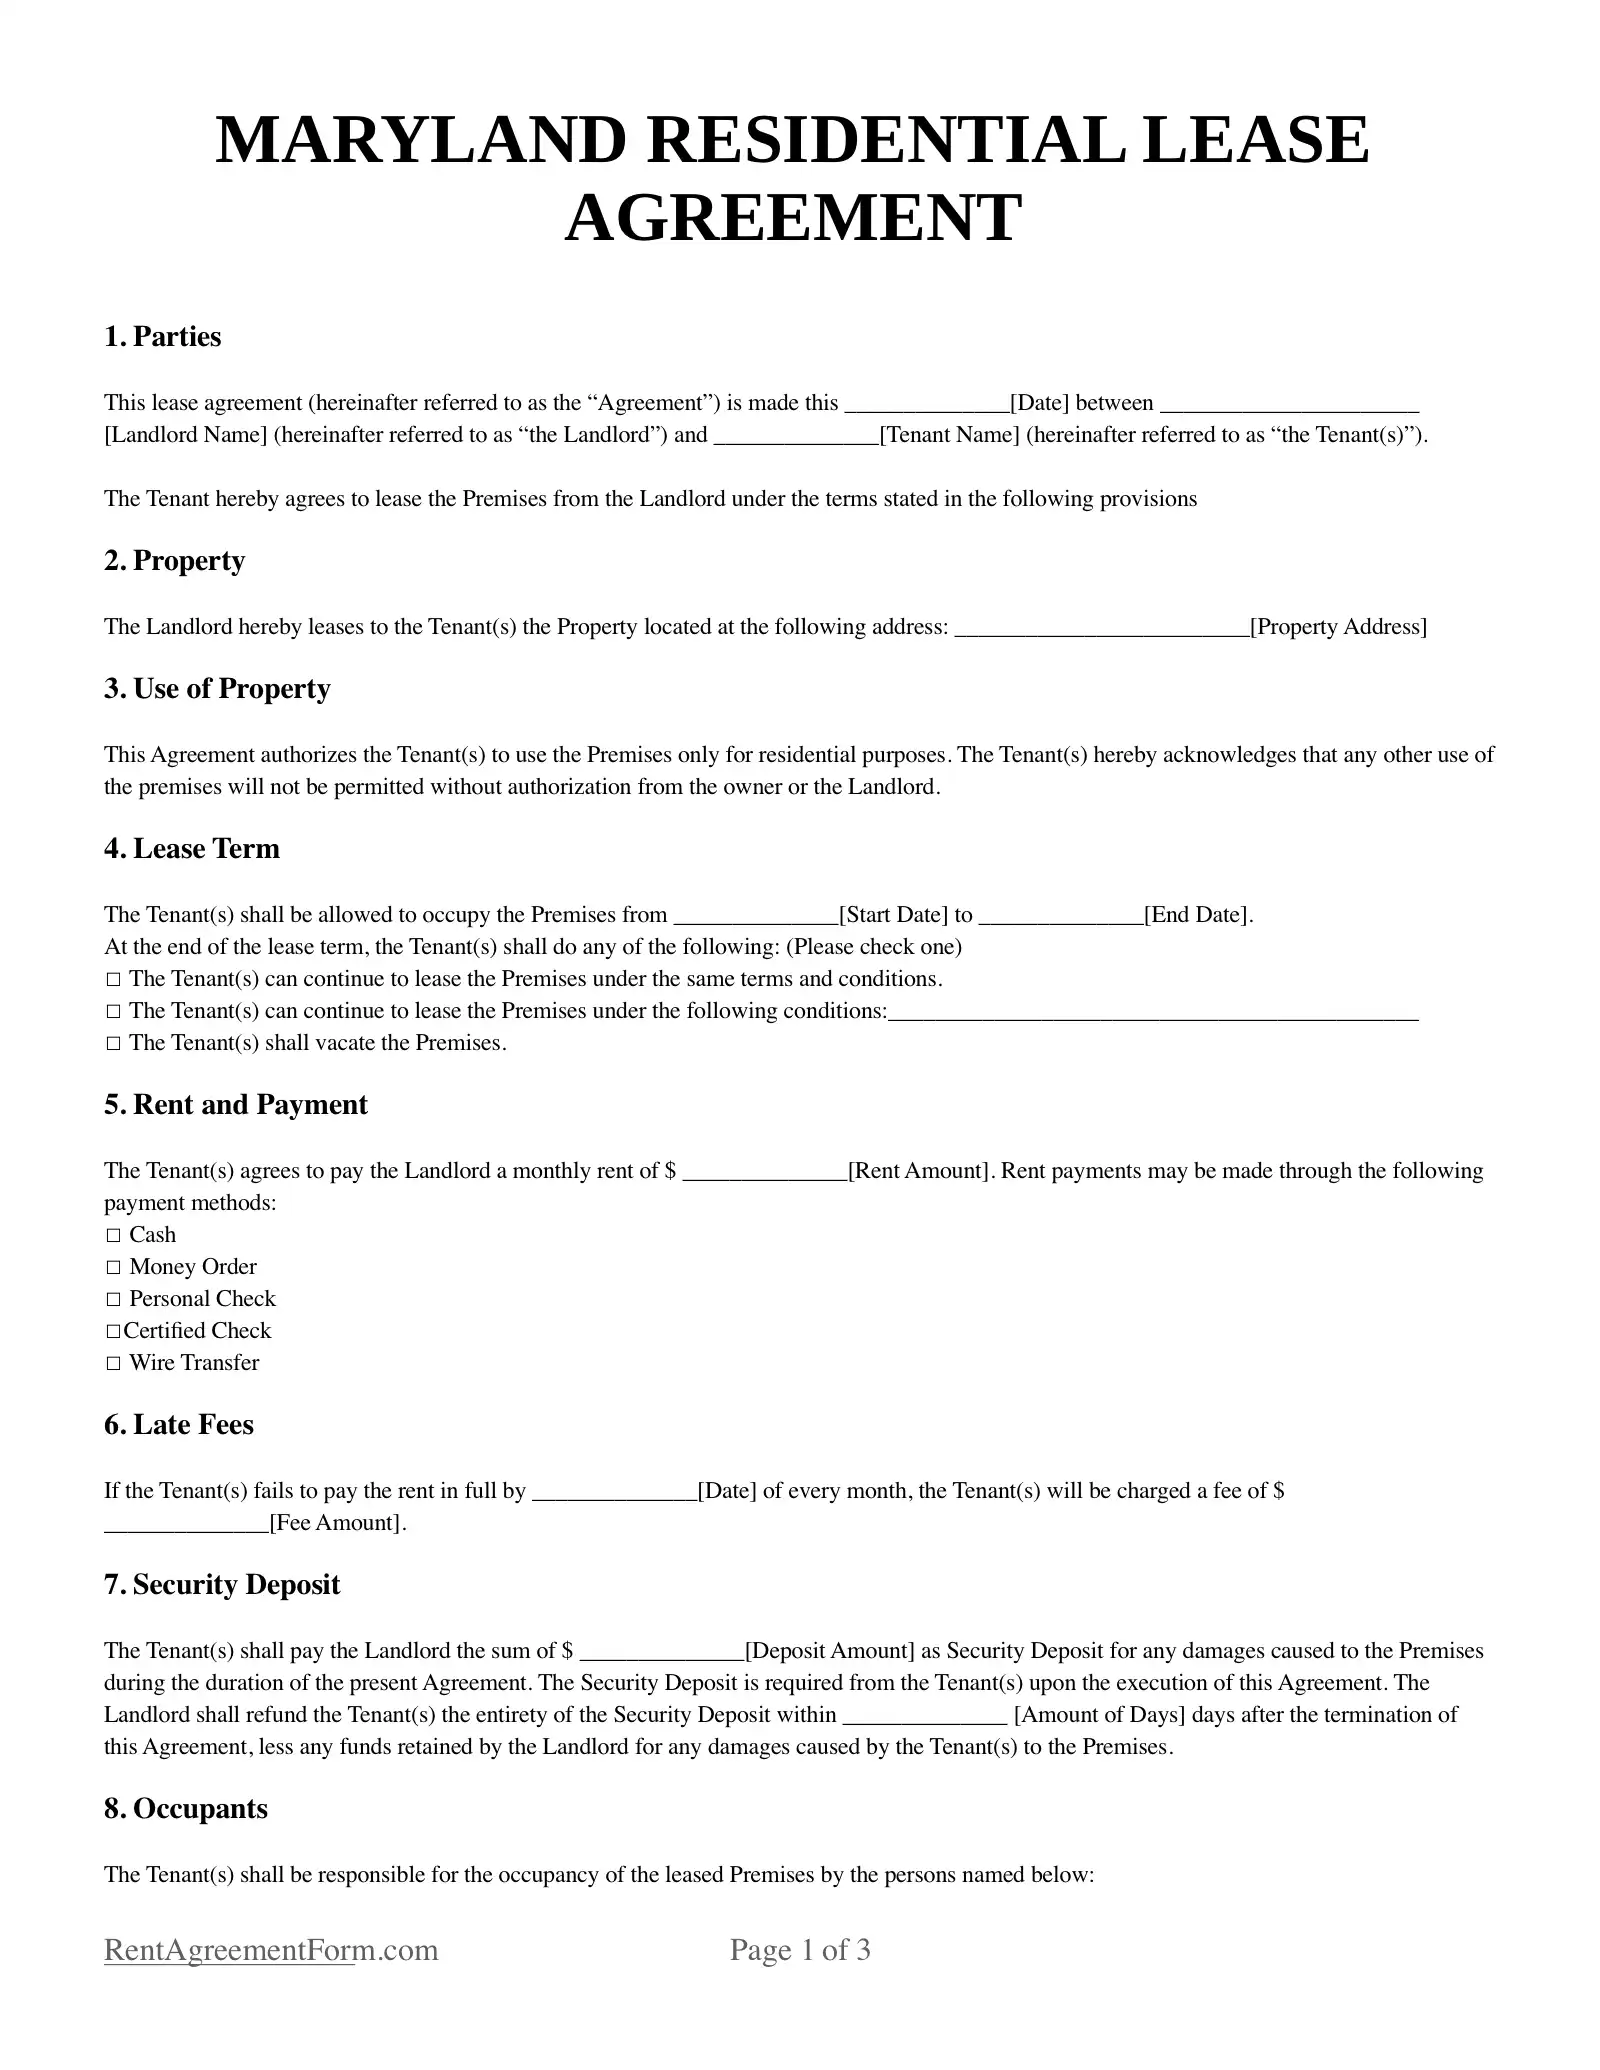 Maryland Residential Lease Agreement Sample